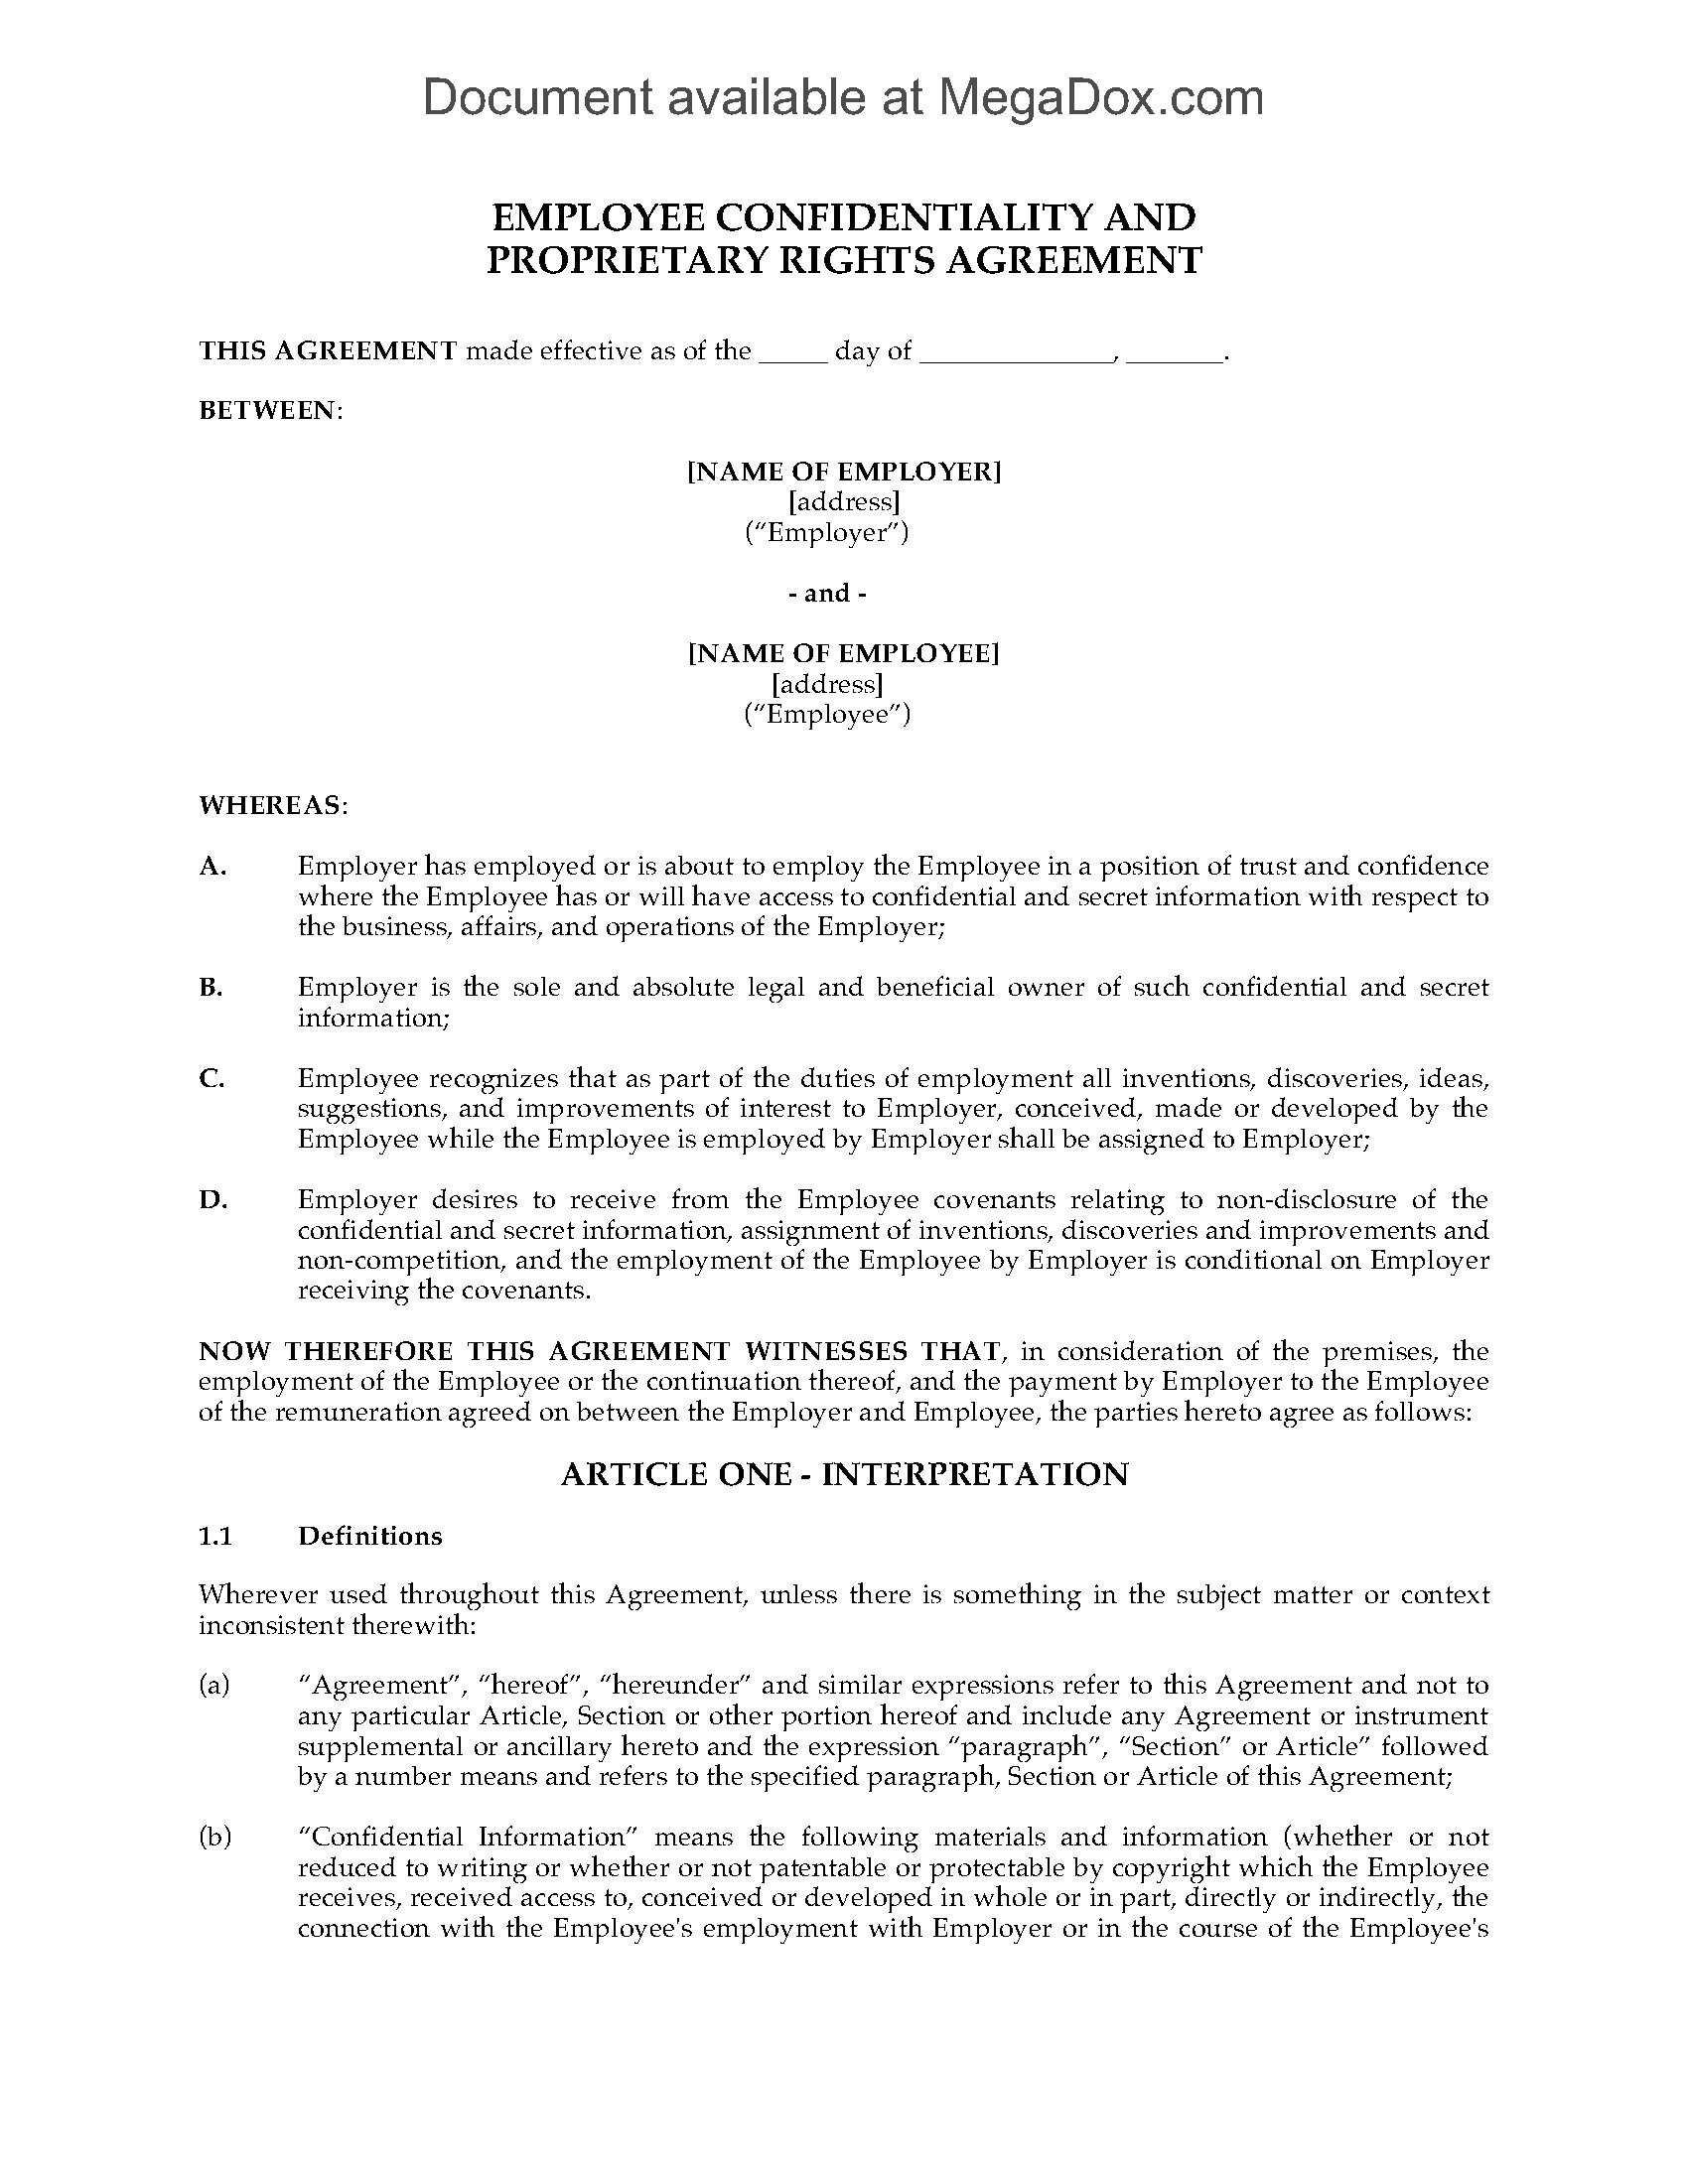 proprietary rights assignment agreement